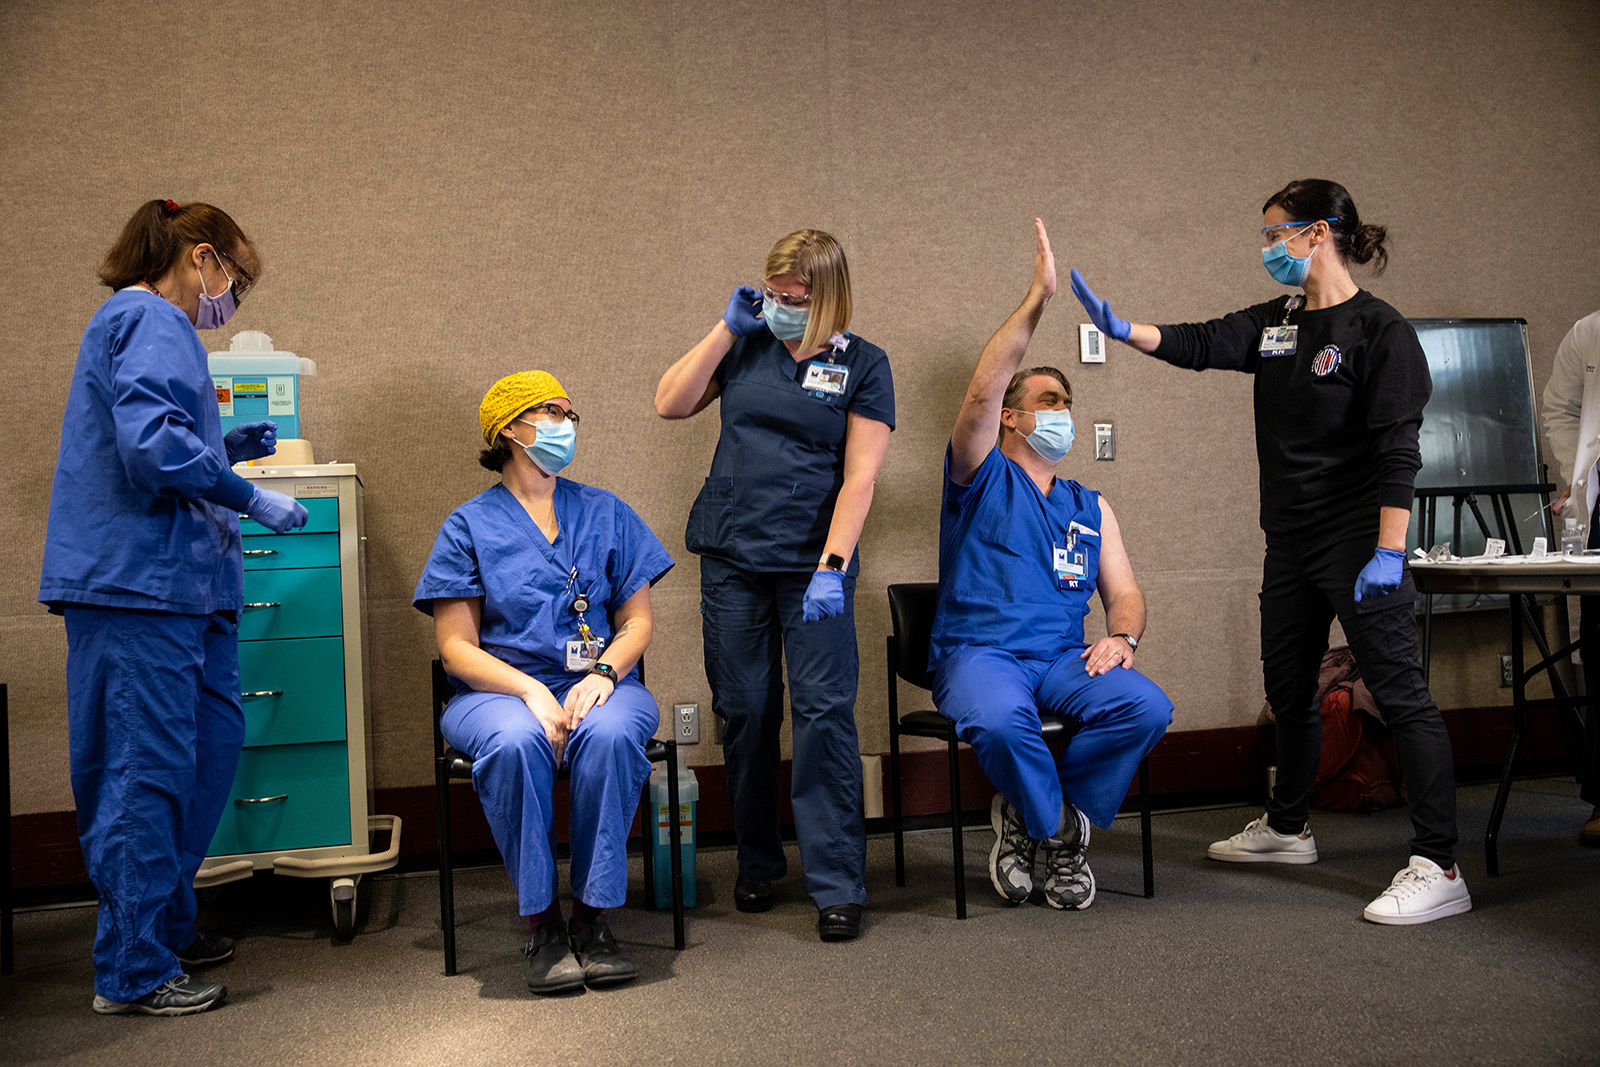 A group of people in hospital scrubs high five after being vaccinated against COVID-19